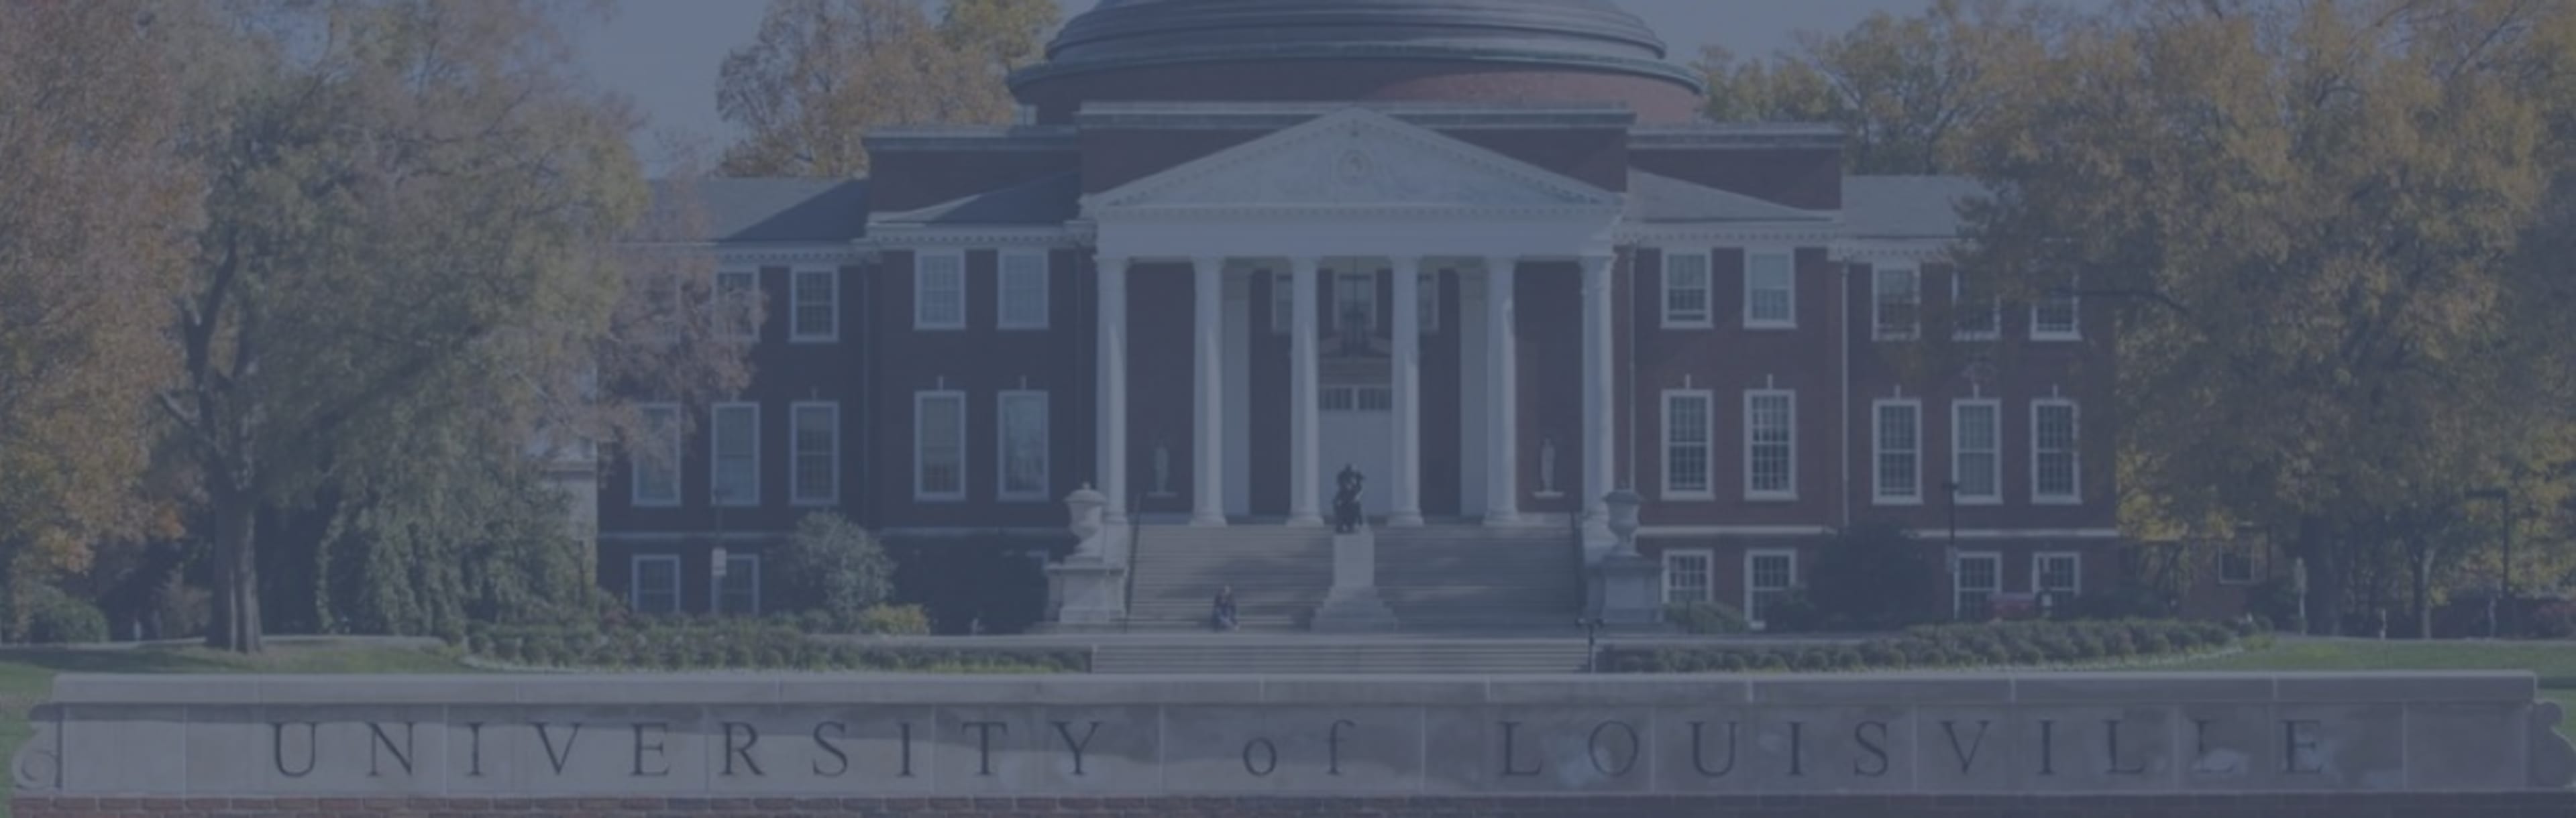 University of Louisville - School of Public Health and Information Sciences Master i folkehelse